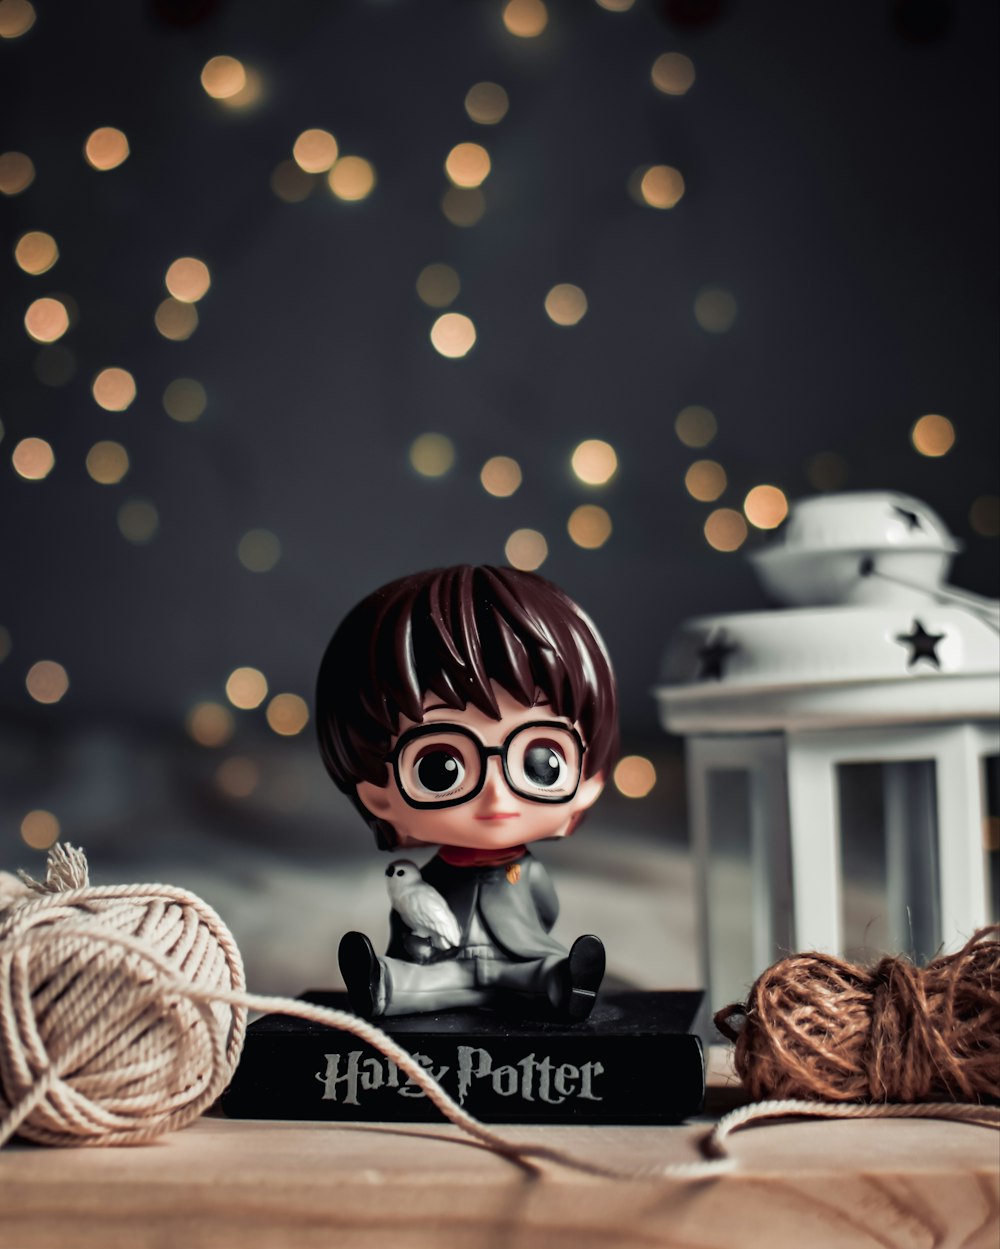 a harry potter figurine sitting on top of a book